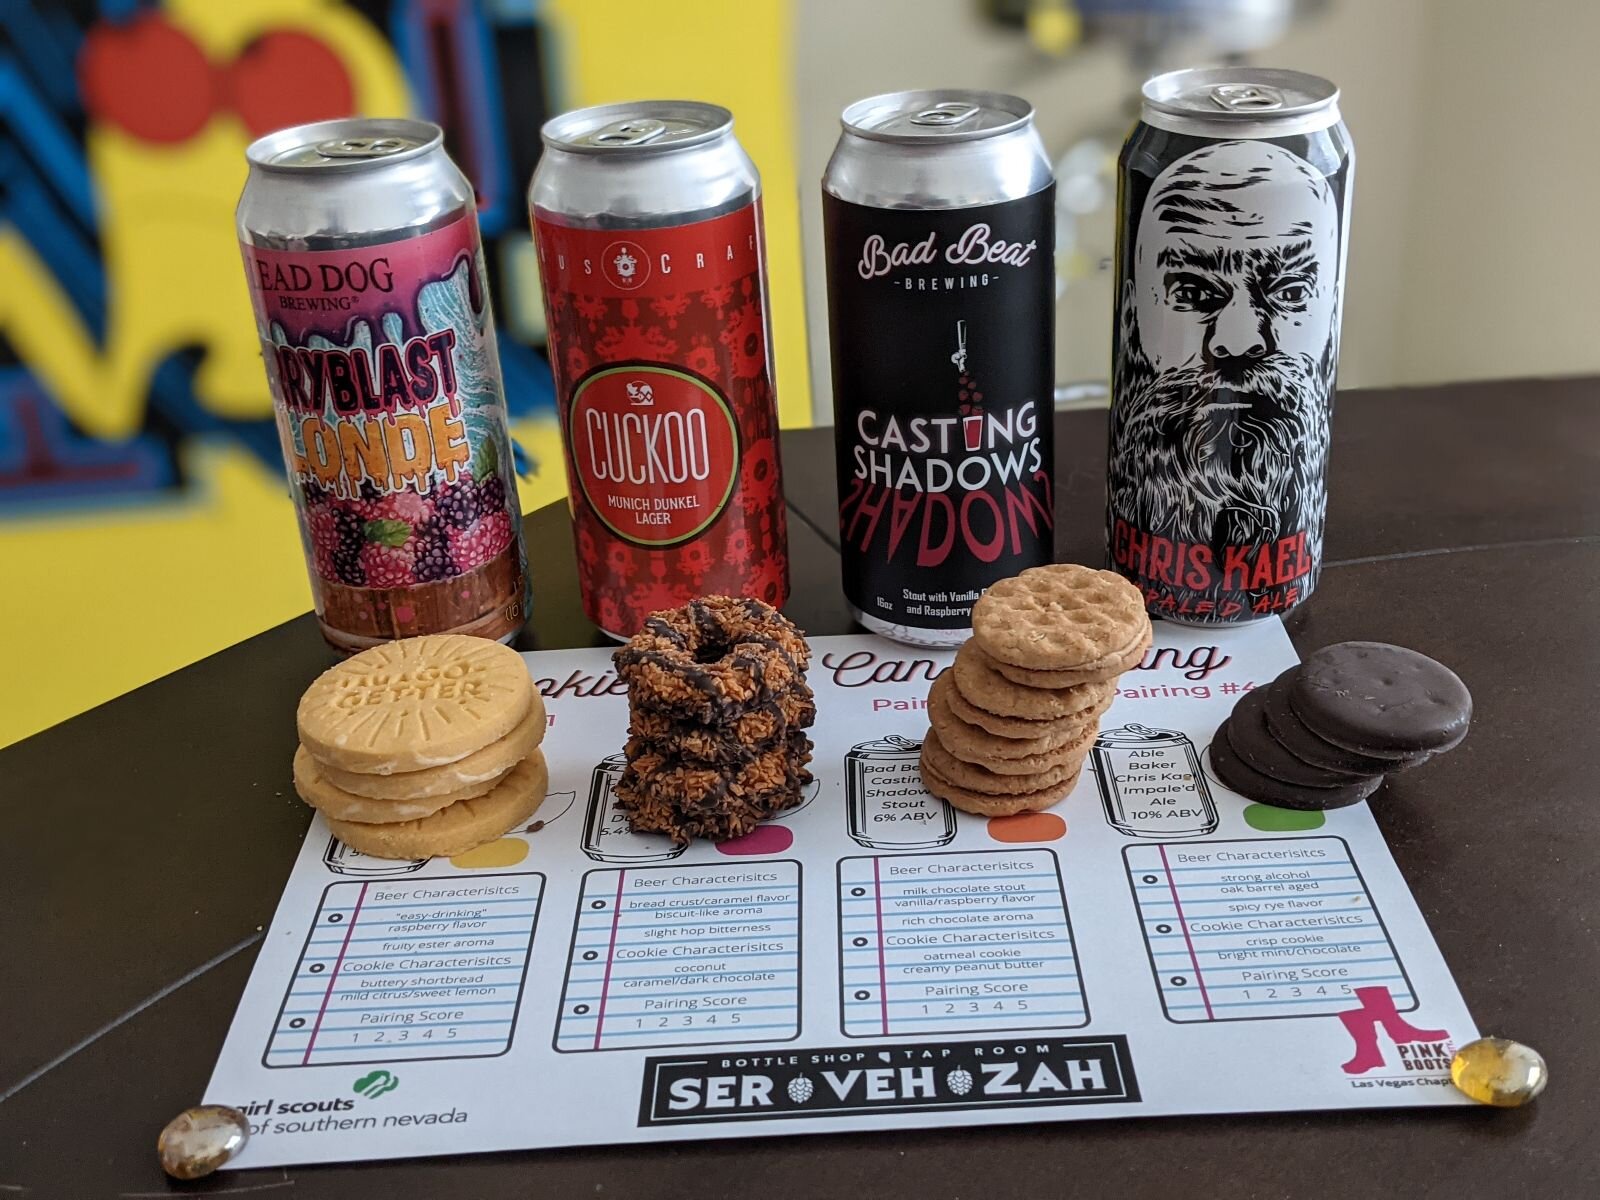 Pink Boots March 2021 Virtual Beer Pairing Event